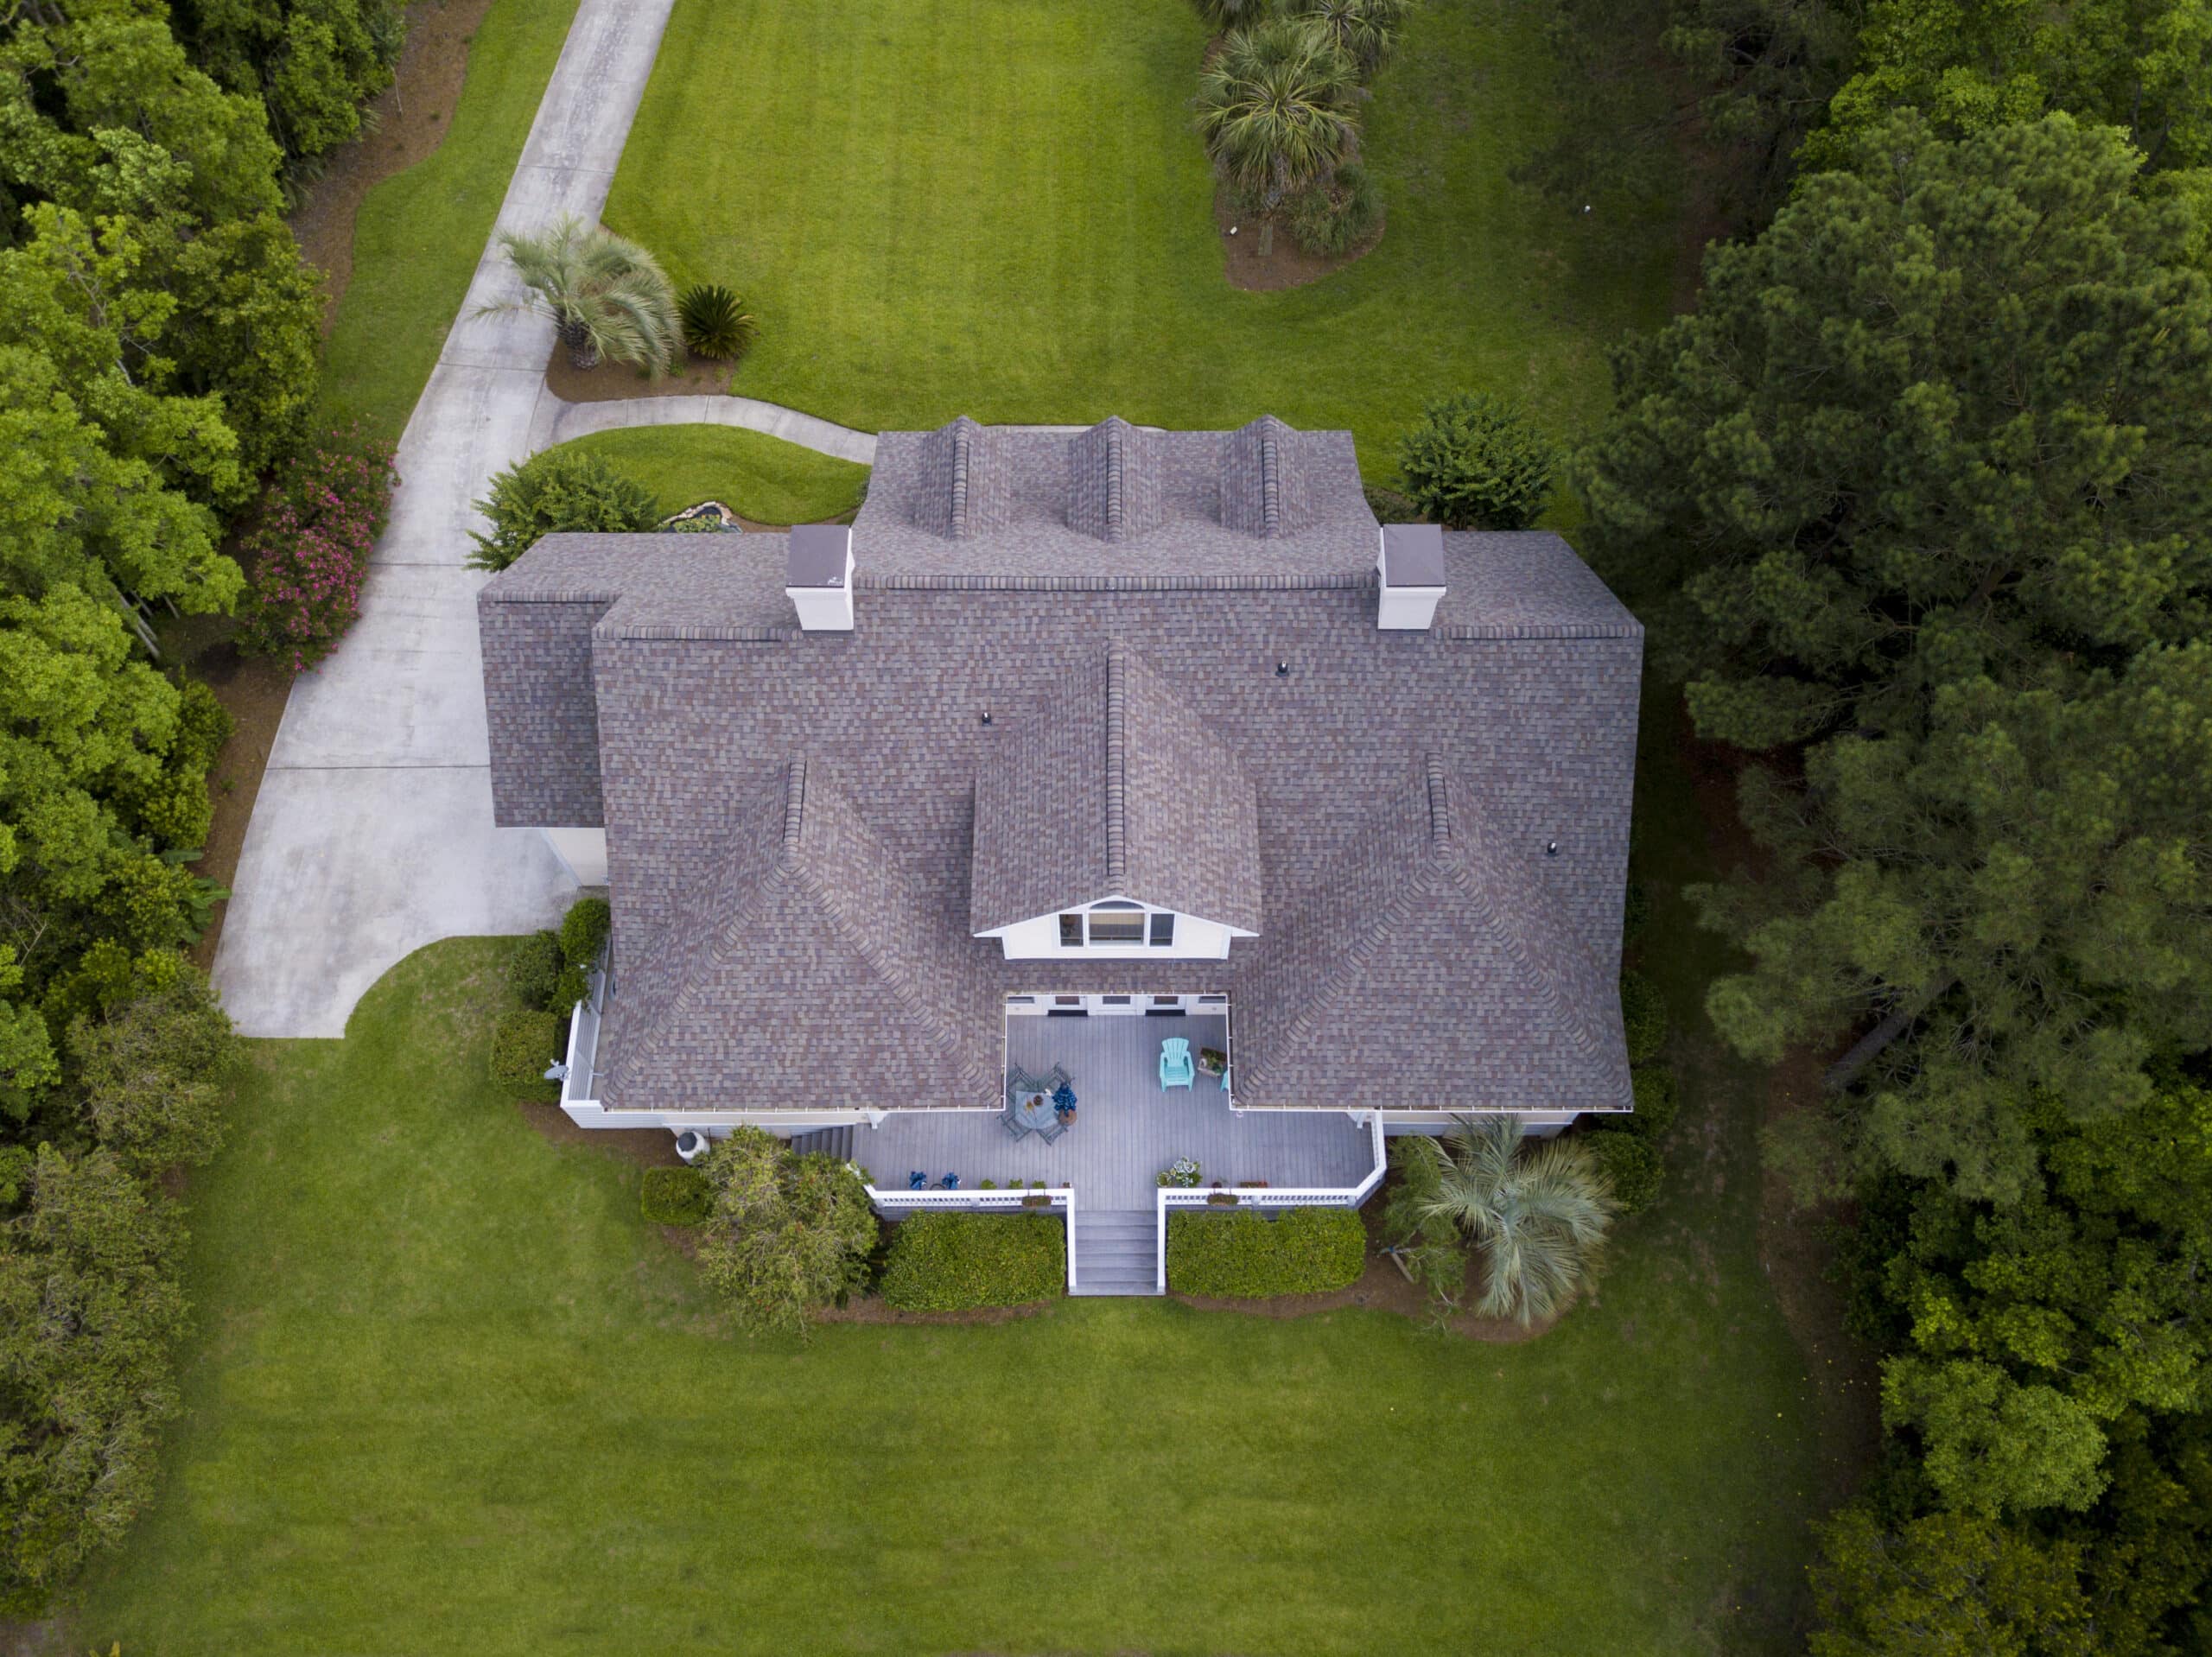 an aerial view of a house in a wooded area.